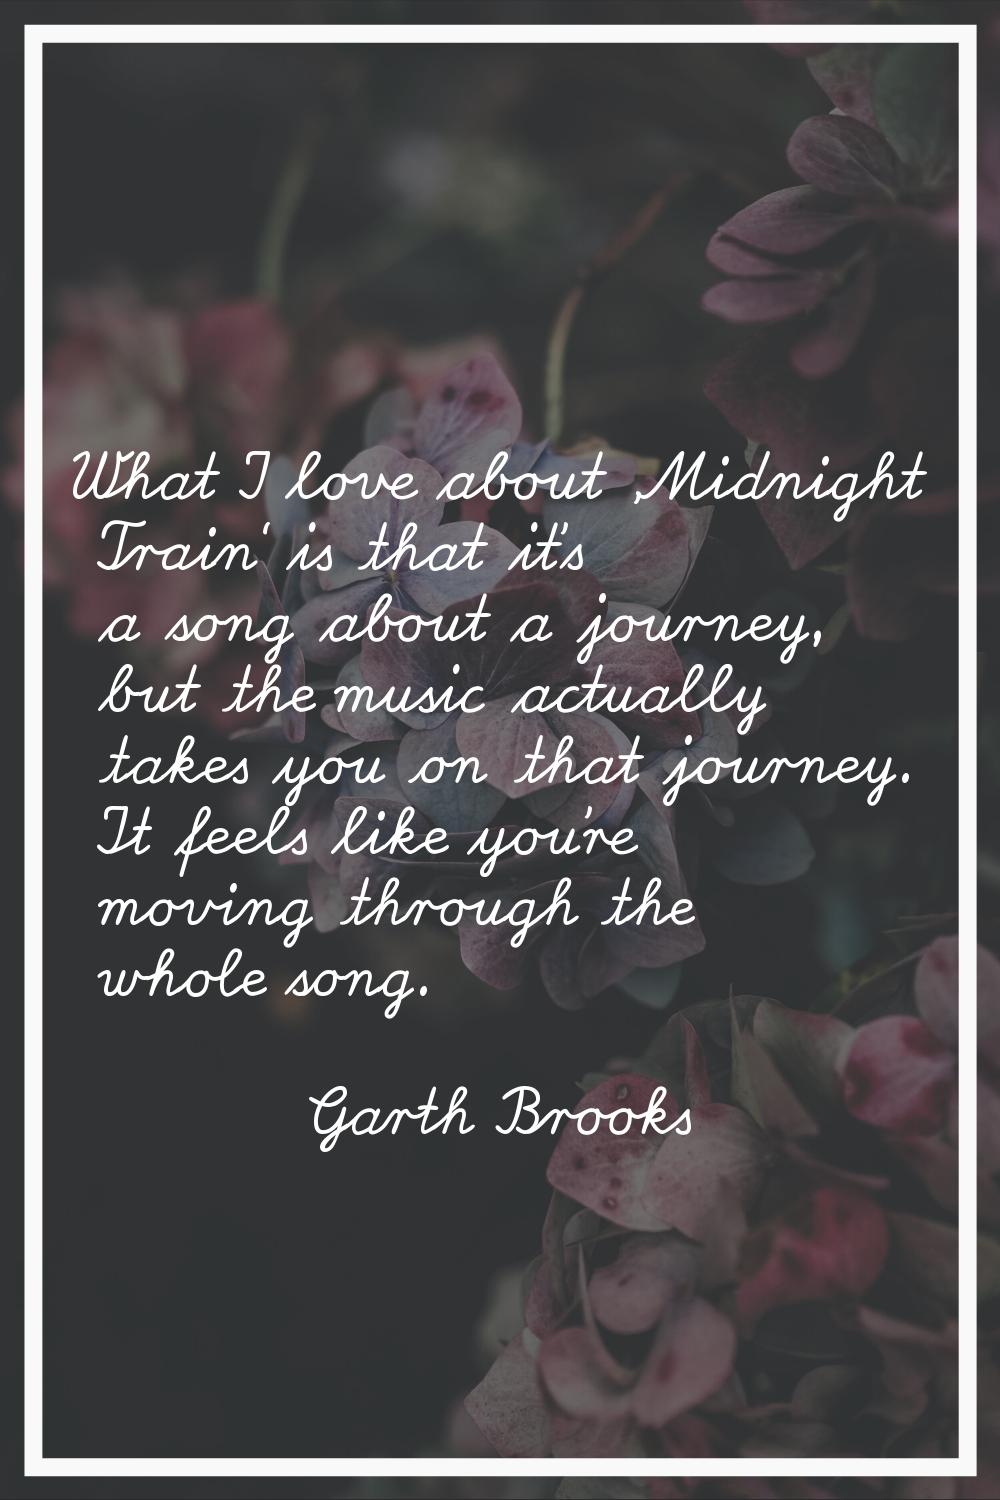 What I love about 'Midnight Train' is that it's a song about a journey, but the music actually take